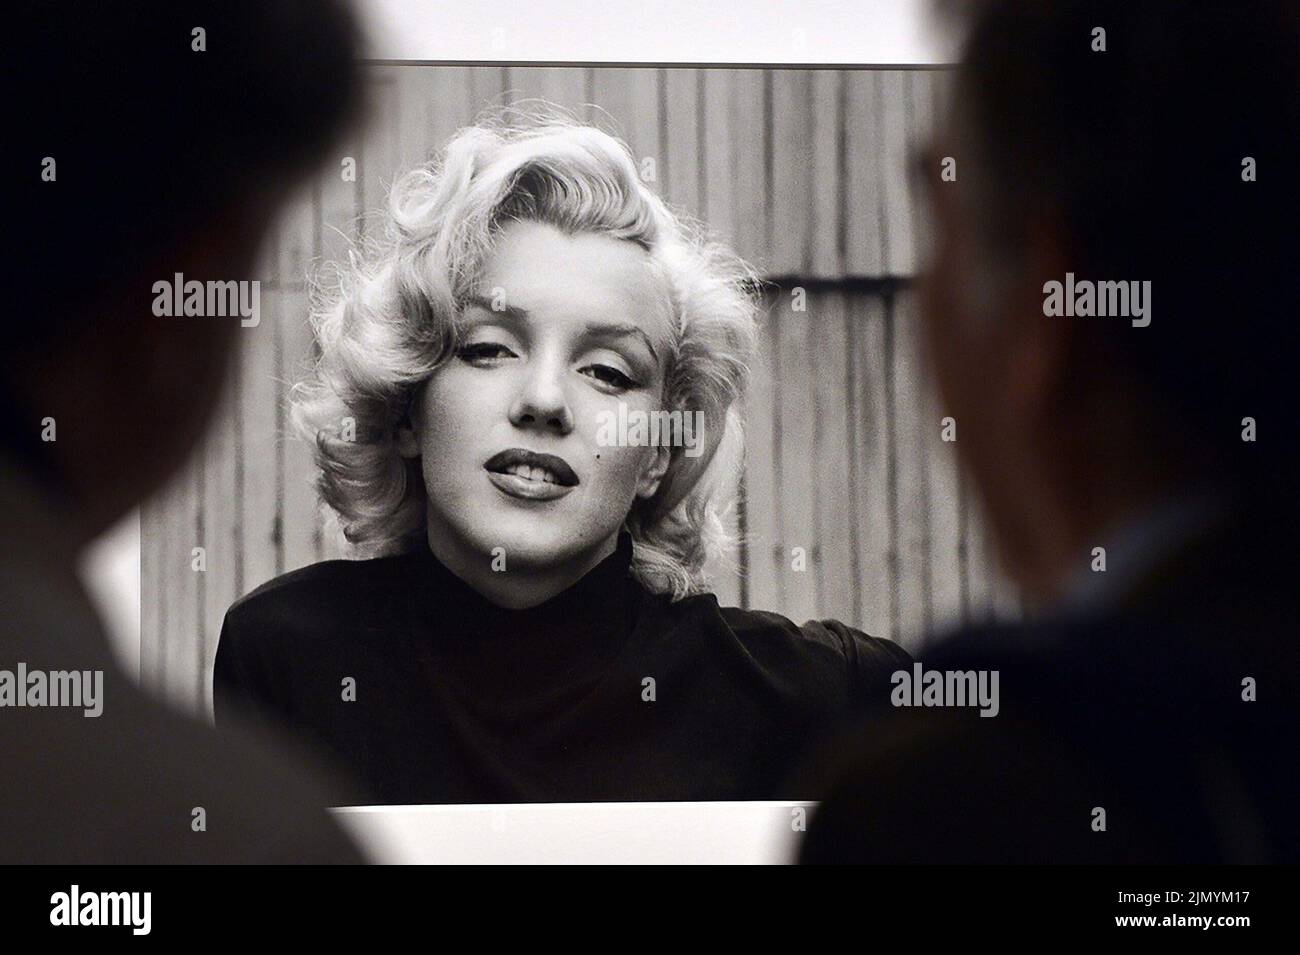 MARILYN MONROE in BECOMING MARILYN (2021), directed by MICHELE DOMINICI. Credit: Arte France / Album Stock Photo